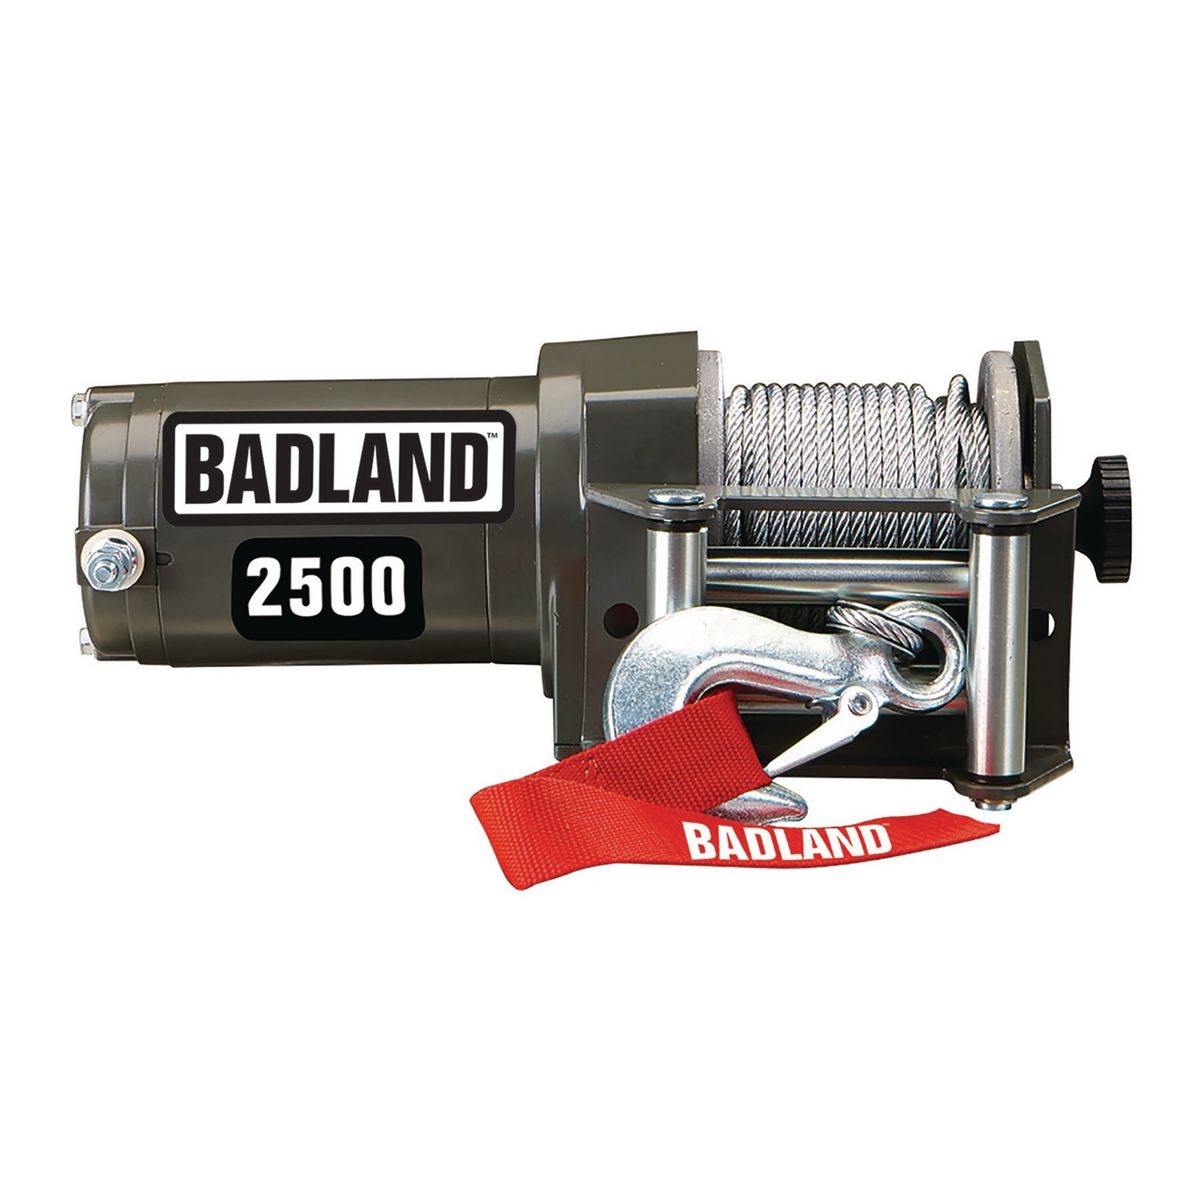 How To Use Badland Winch Without Remote